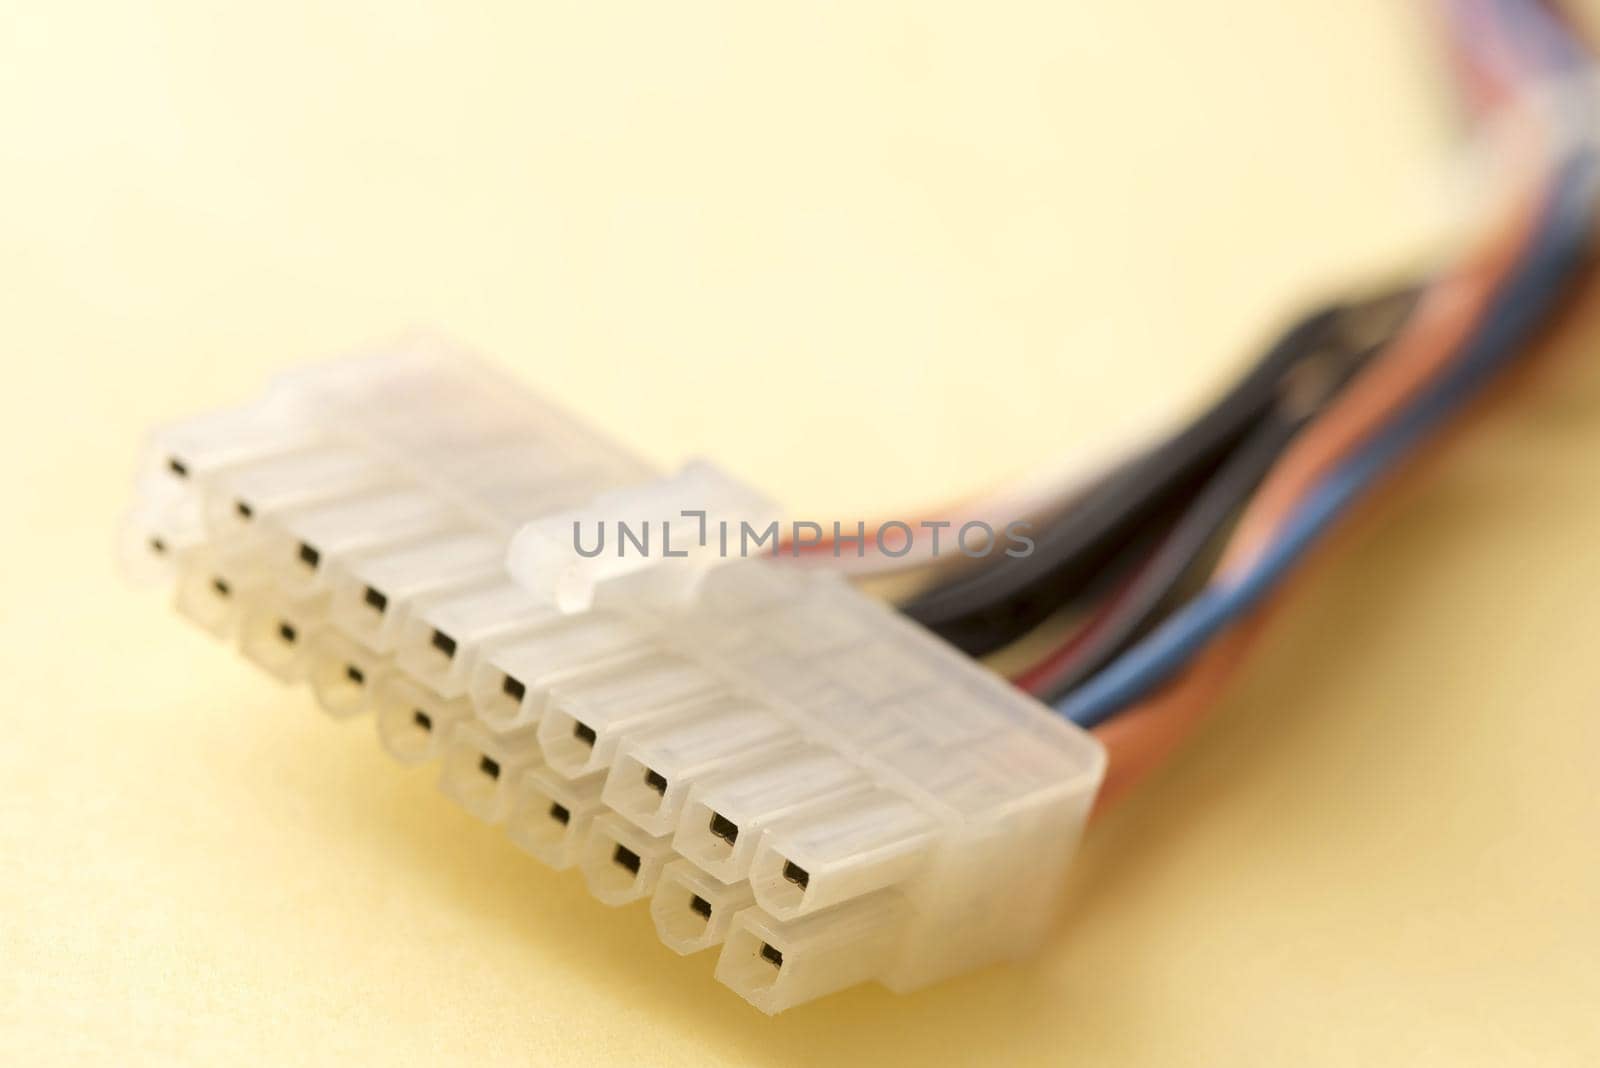 Cable input plug in close-up view against bright background